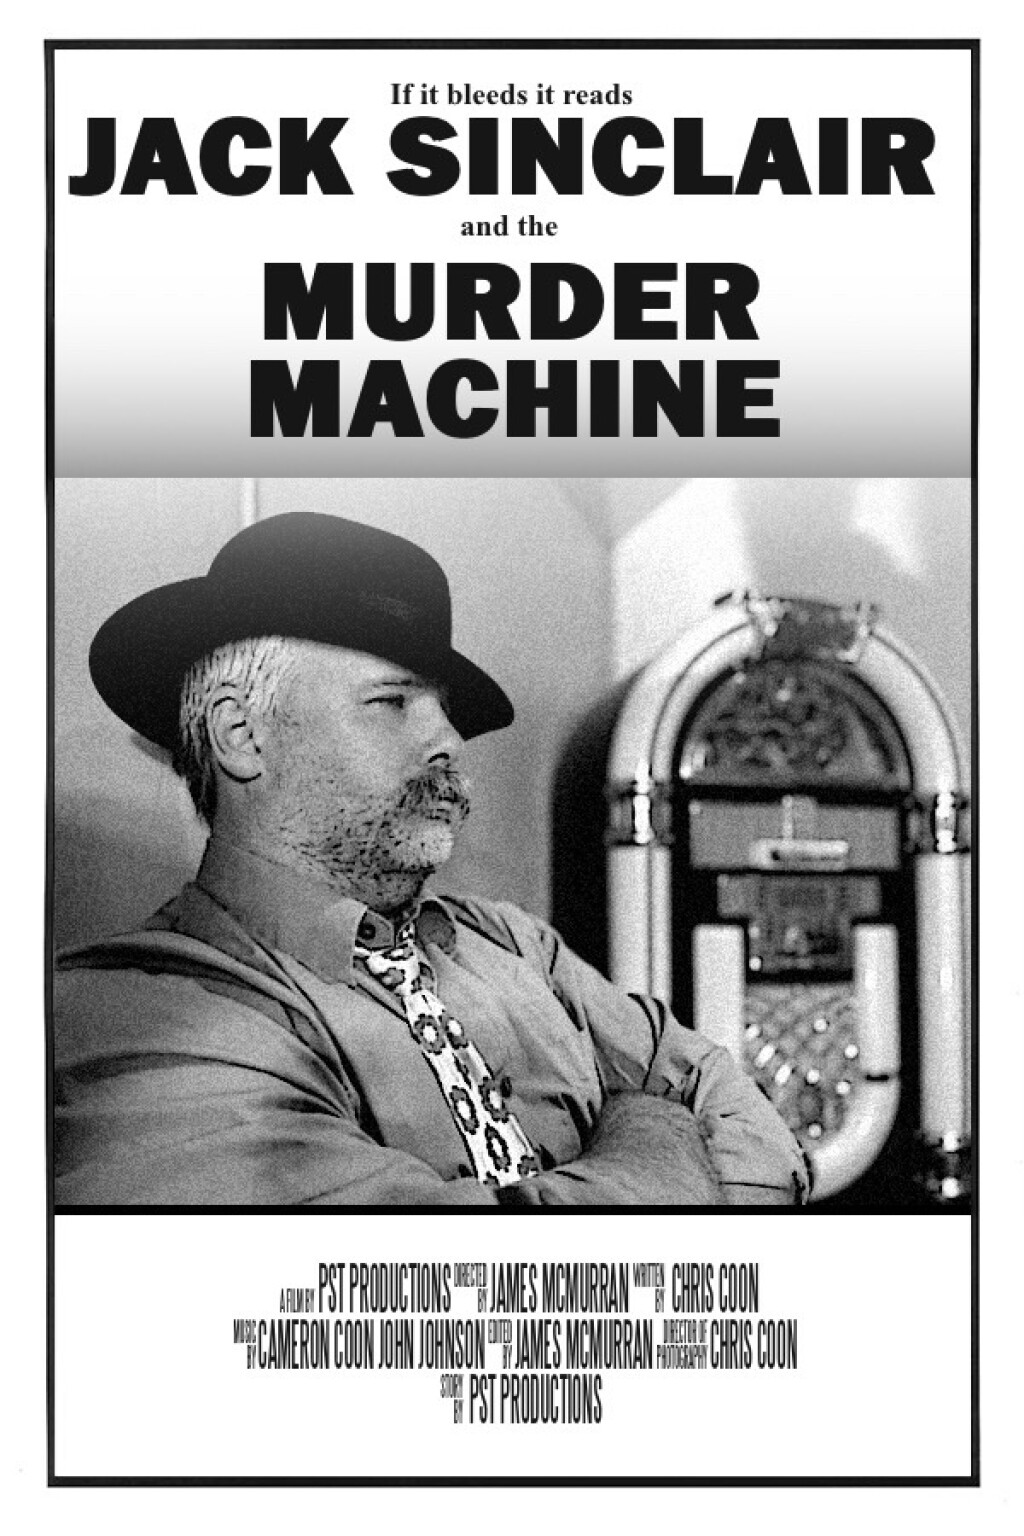 Filmposter for Jack Sinclair and the Murder Machine